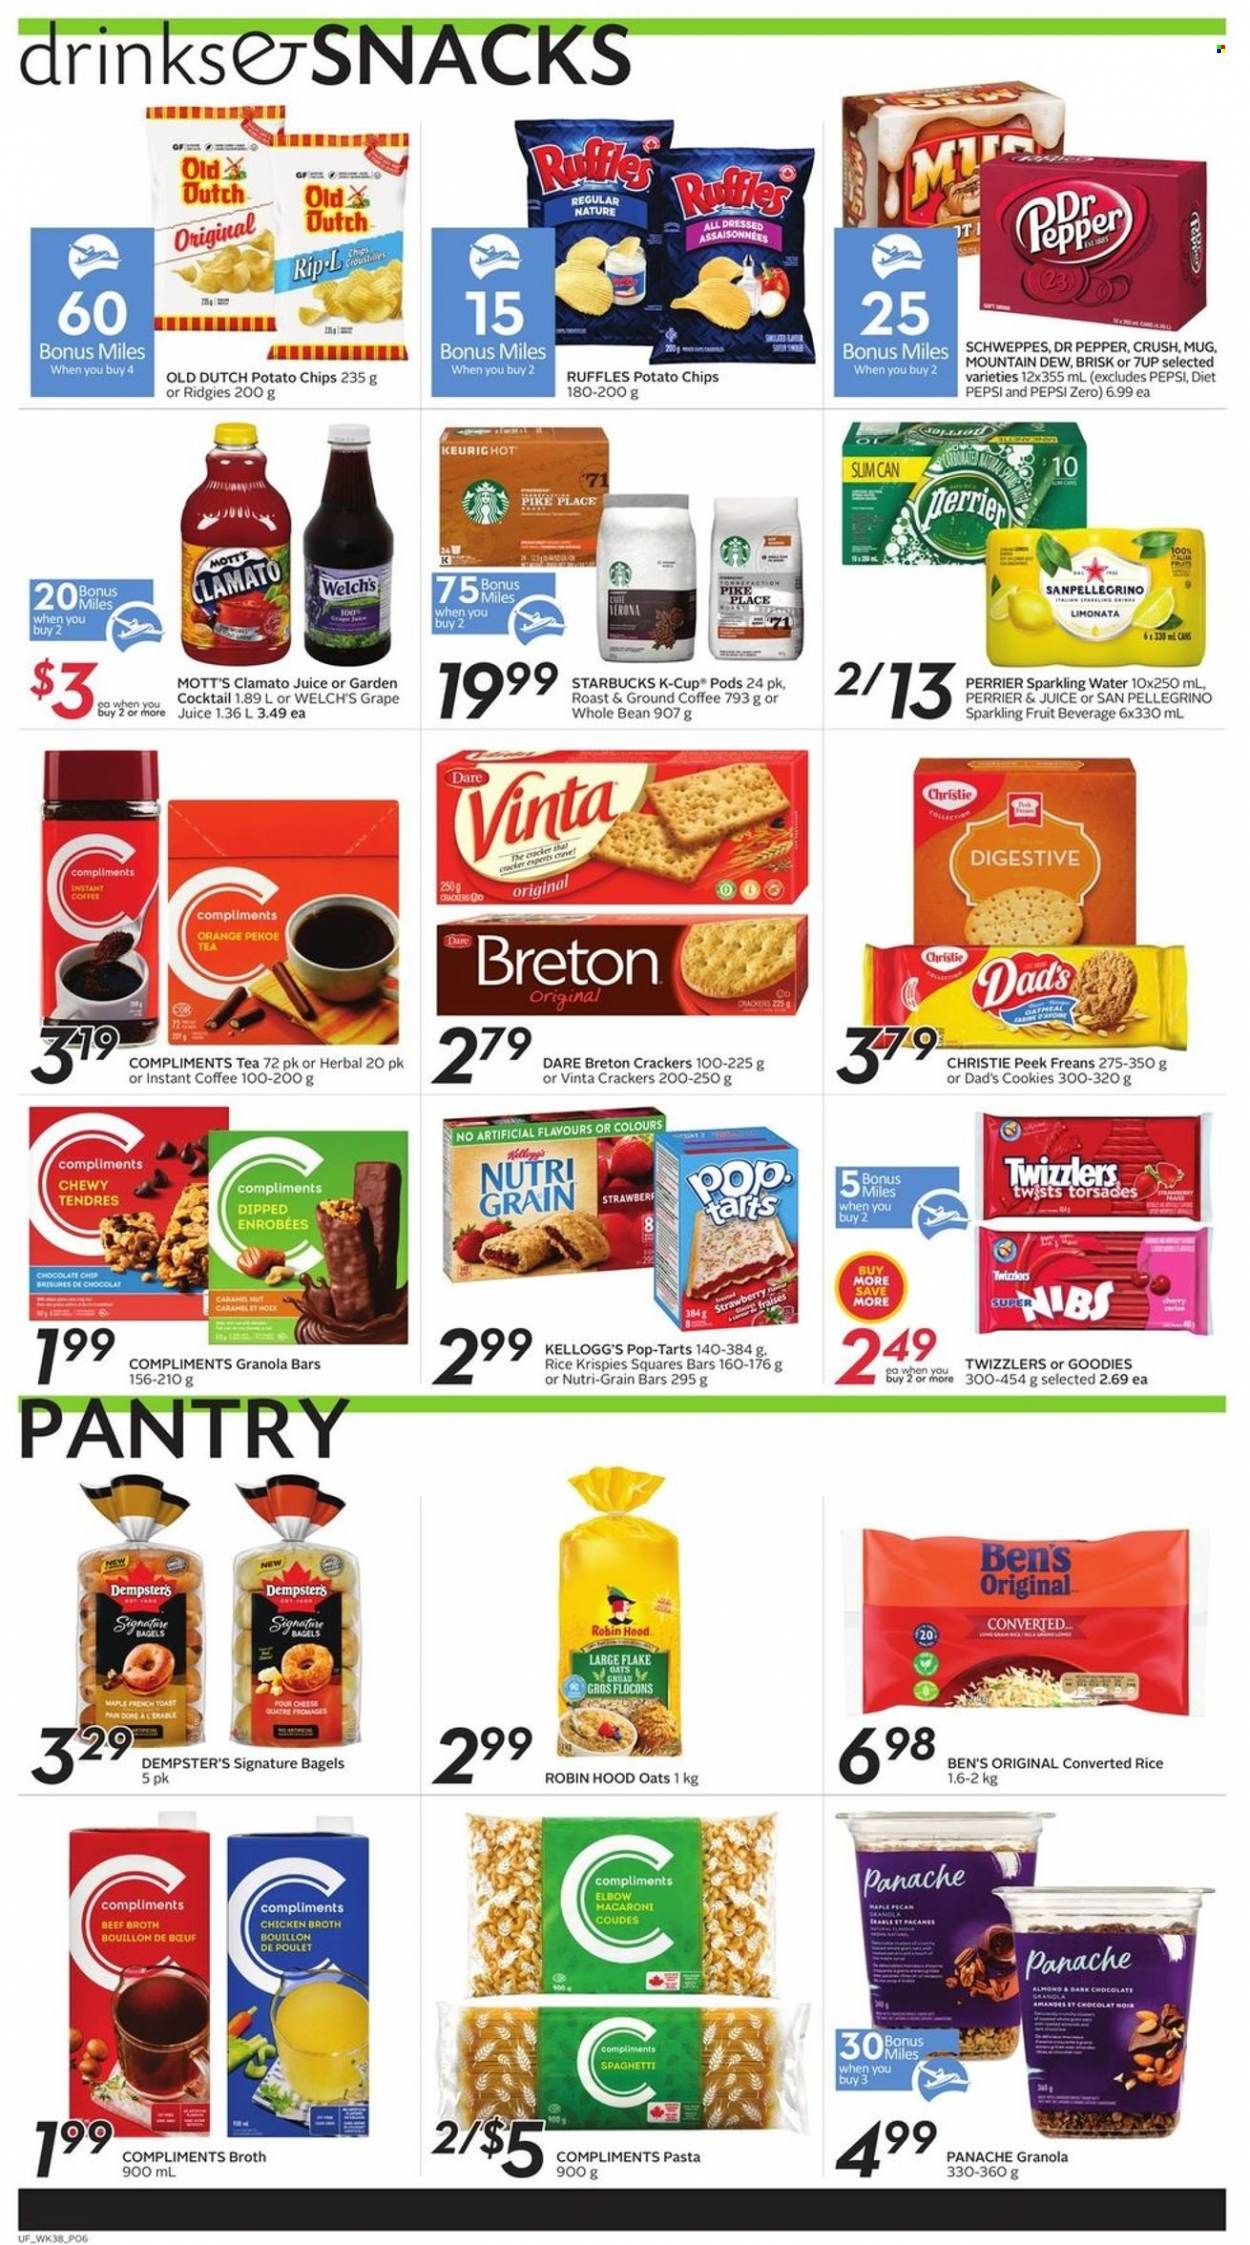 thumbnail - Sobeys Urban Fresh Flyer - January 13, 2022 - January 19, 2022 - Sales products - bagels, Welch's, Mott's, spaghetti, macaroni, pasta, cheese, cookies, chocolate, snack, crackers, Kellogg's, dark chocolate, Digestive, Pop-Tarts, potato chips, Ruffles, beef broth, bouillon, chicken broth, oats, broth, granola bar, Rice Krispies, Nutri-Grain, Mountain Dew, Schweppes, Pepsi, juice, Dr. Pepper, Diet Pepsi, Clamato, 7UP, Perrier, sparkling water, San Pellegrino, tea, instant coffee, ground coffee, coffee capsules, Starbucks, K-Cups, pet bed, chips, oranges. Page 6.